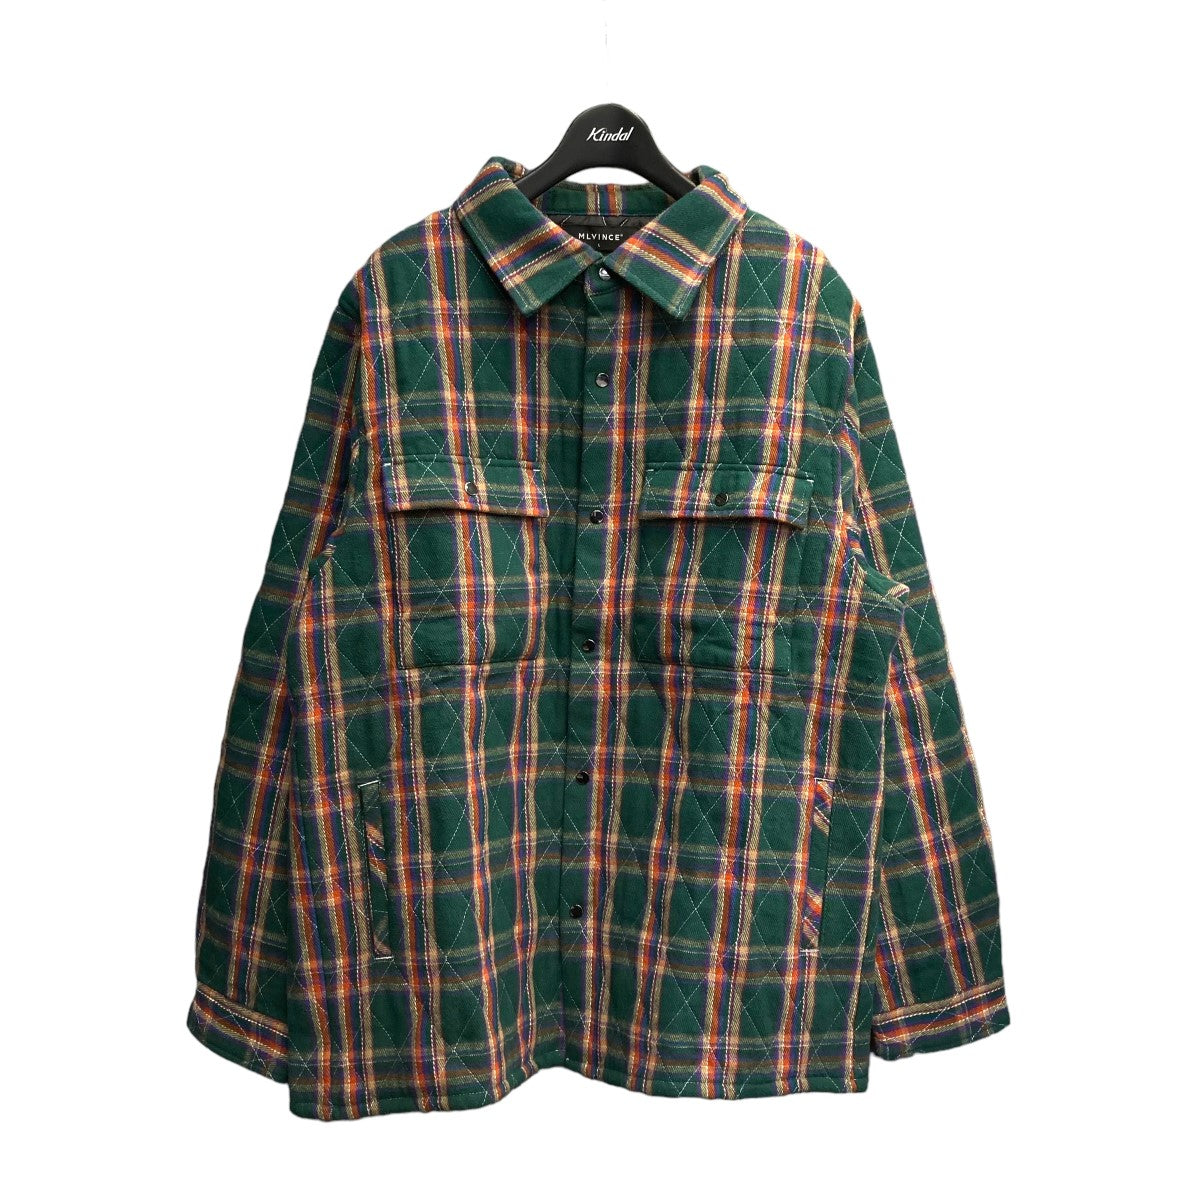 MLVINCE(メルヴィンス) 「QUILTED CHECK SHIRTS JACKET」 チェック柄 ...